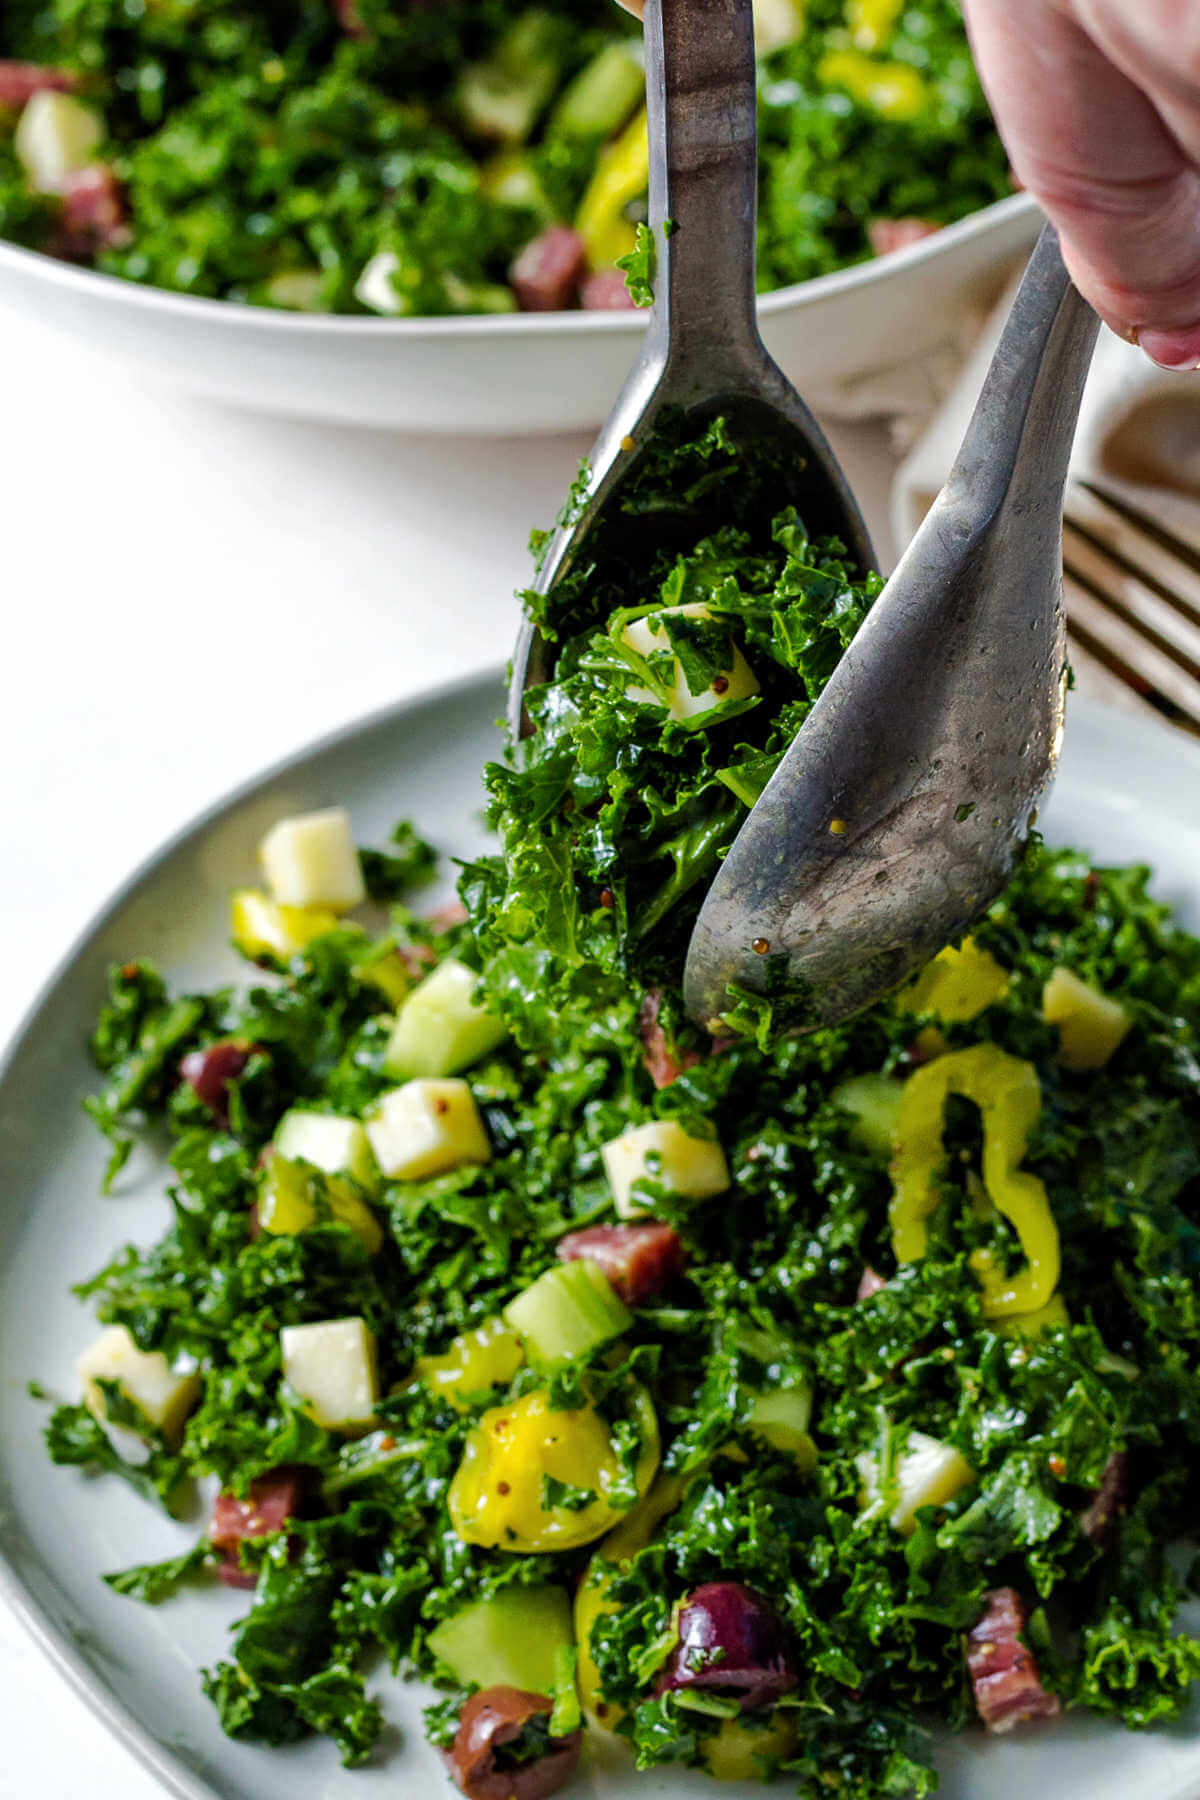 using salad tongs to place a serving of chopped kale salad on a plate.